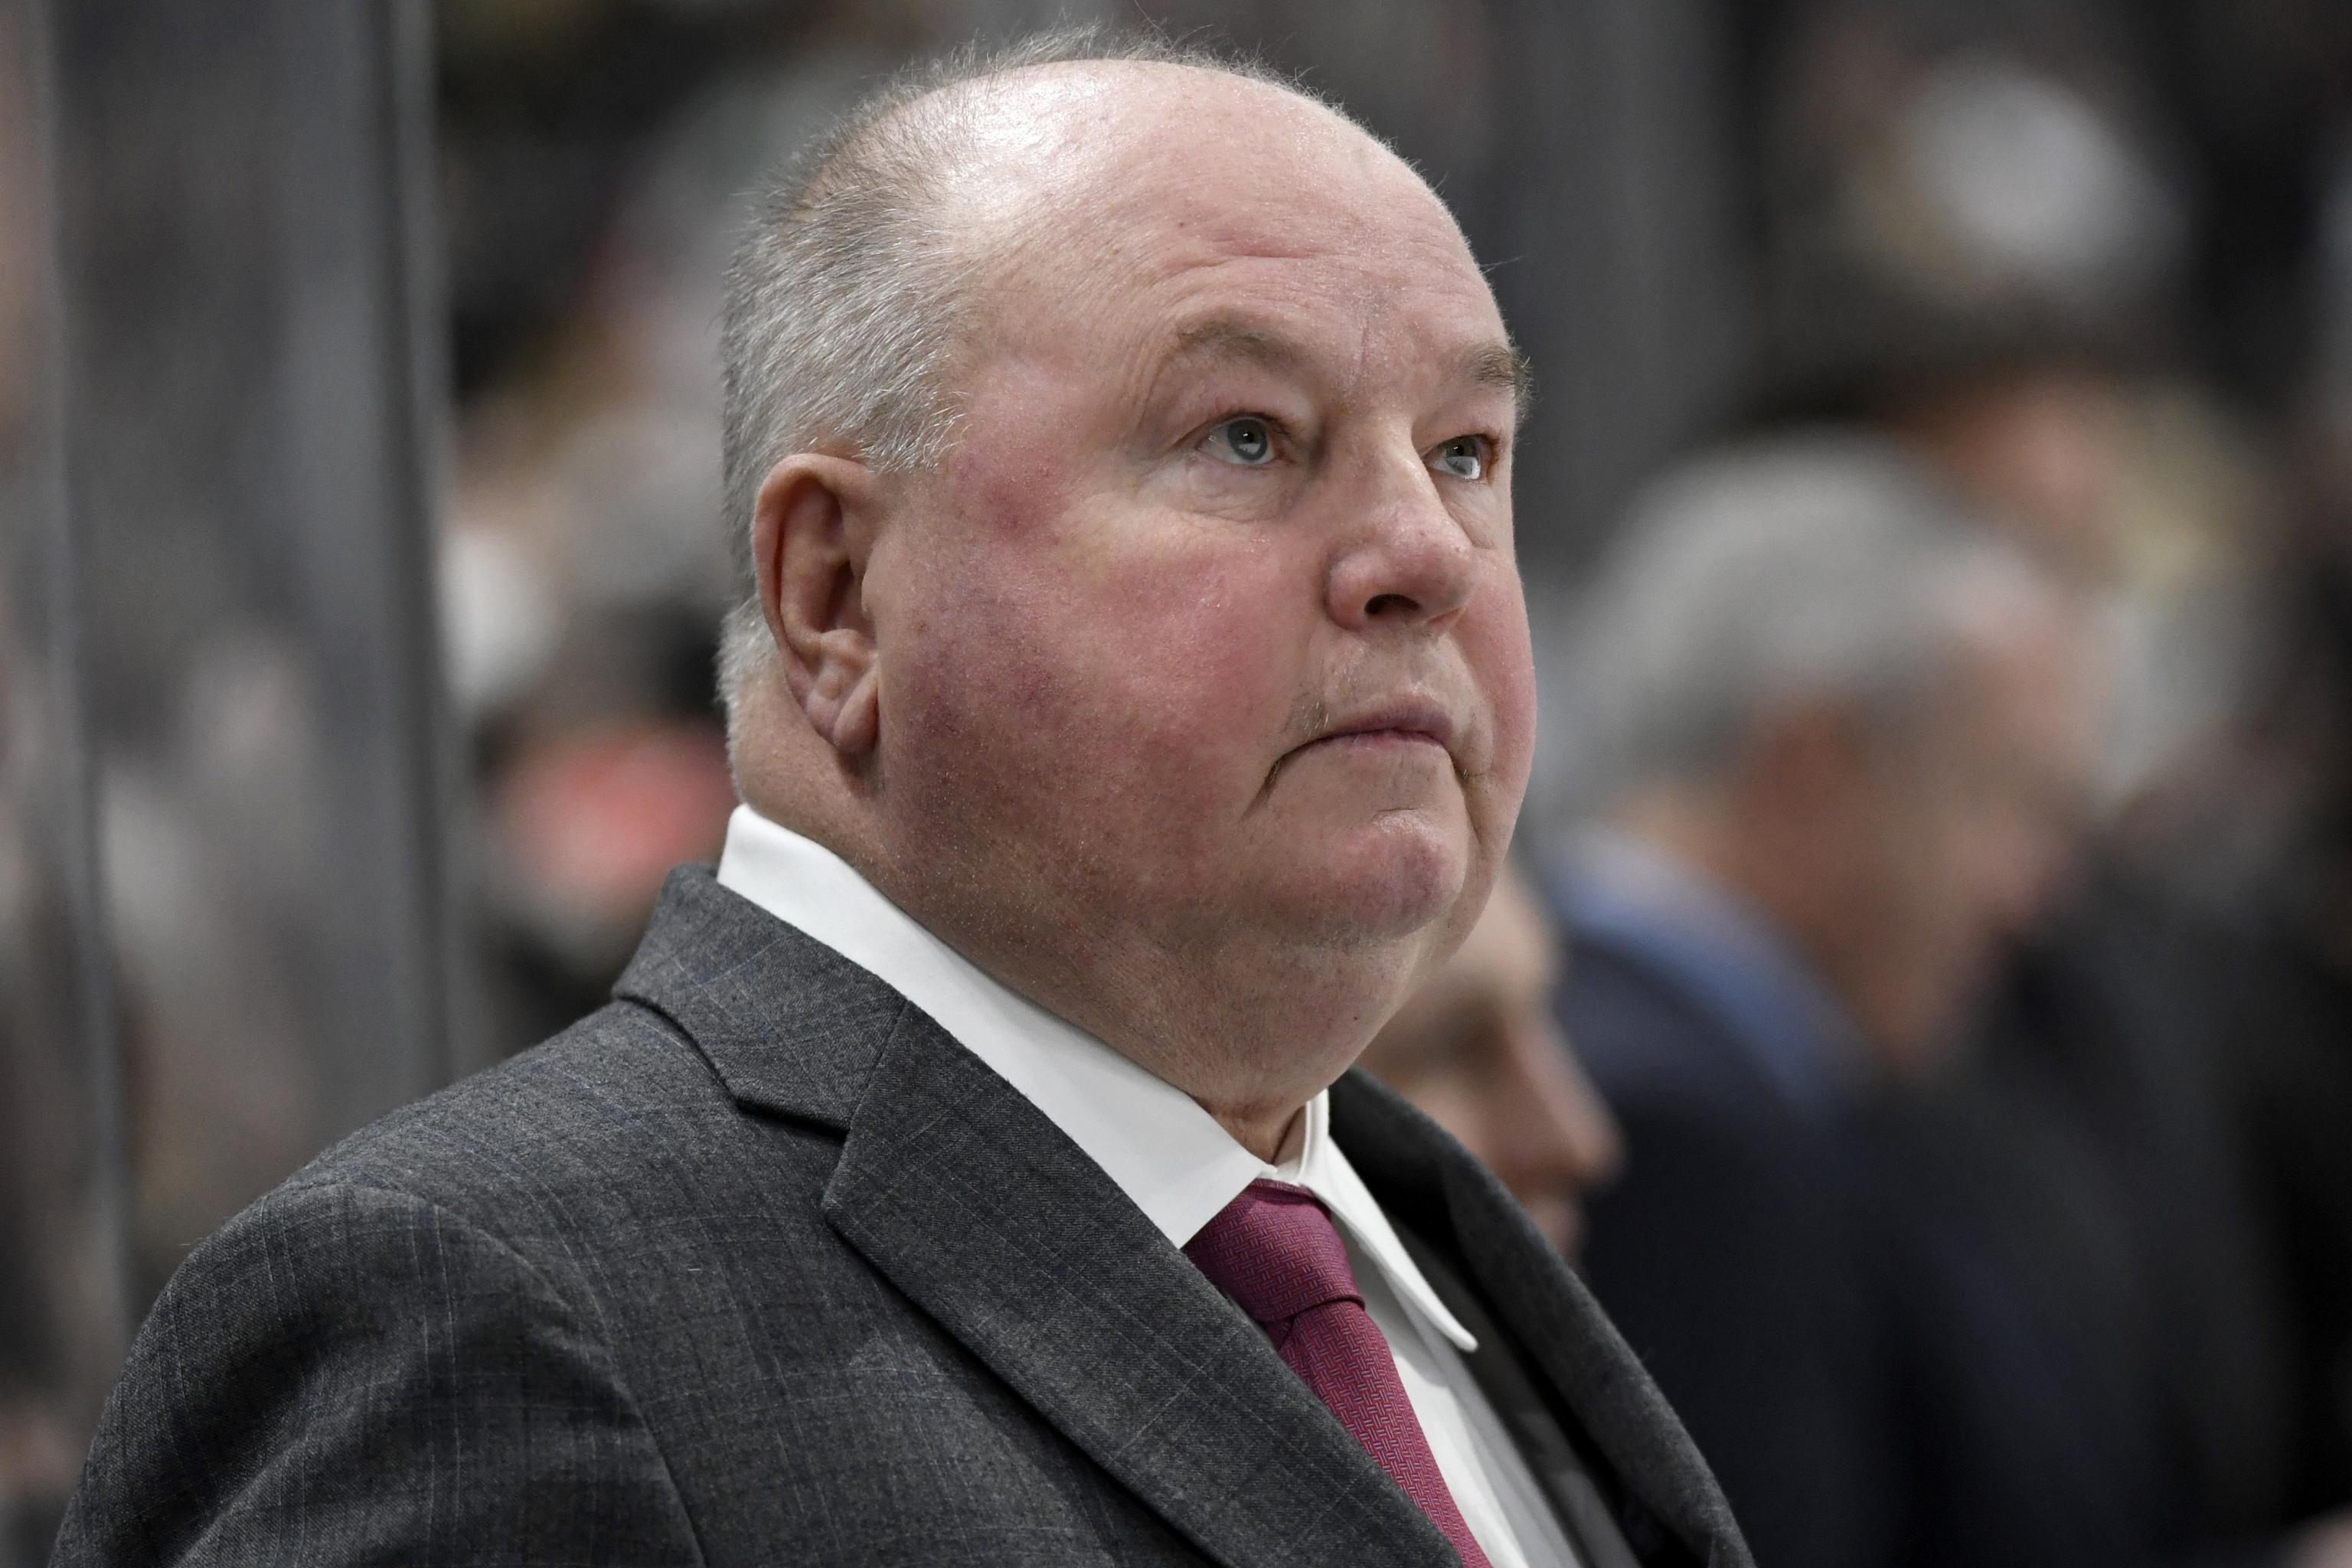 “You Deserved So Much Better”: NHL Community Makes a Saddening Appeal  Following Legendary Coach Bruce Boudreau's Firing - EssentiallySports